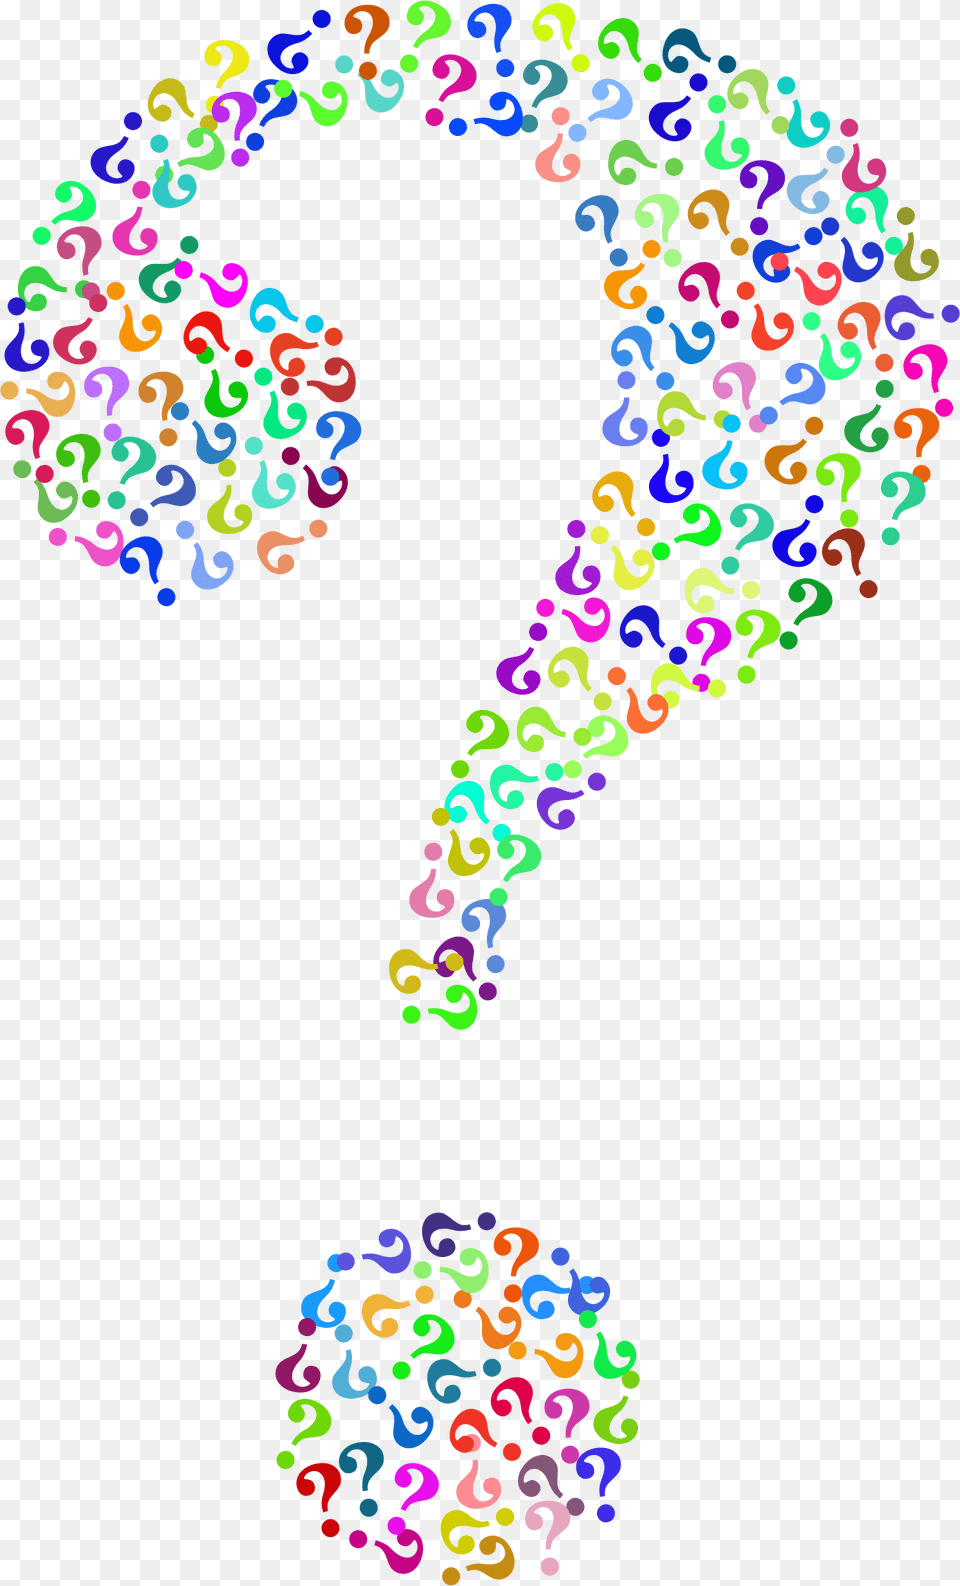 Question Mark Computer Icons Clip Art Question Marks With No Background, Graphics, Floral Design, Pattern, Number Png